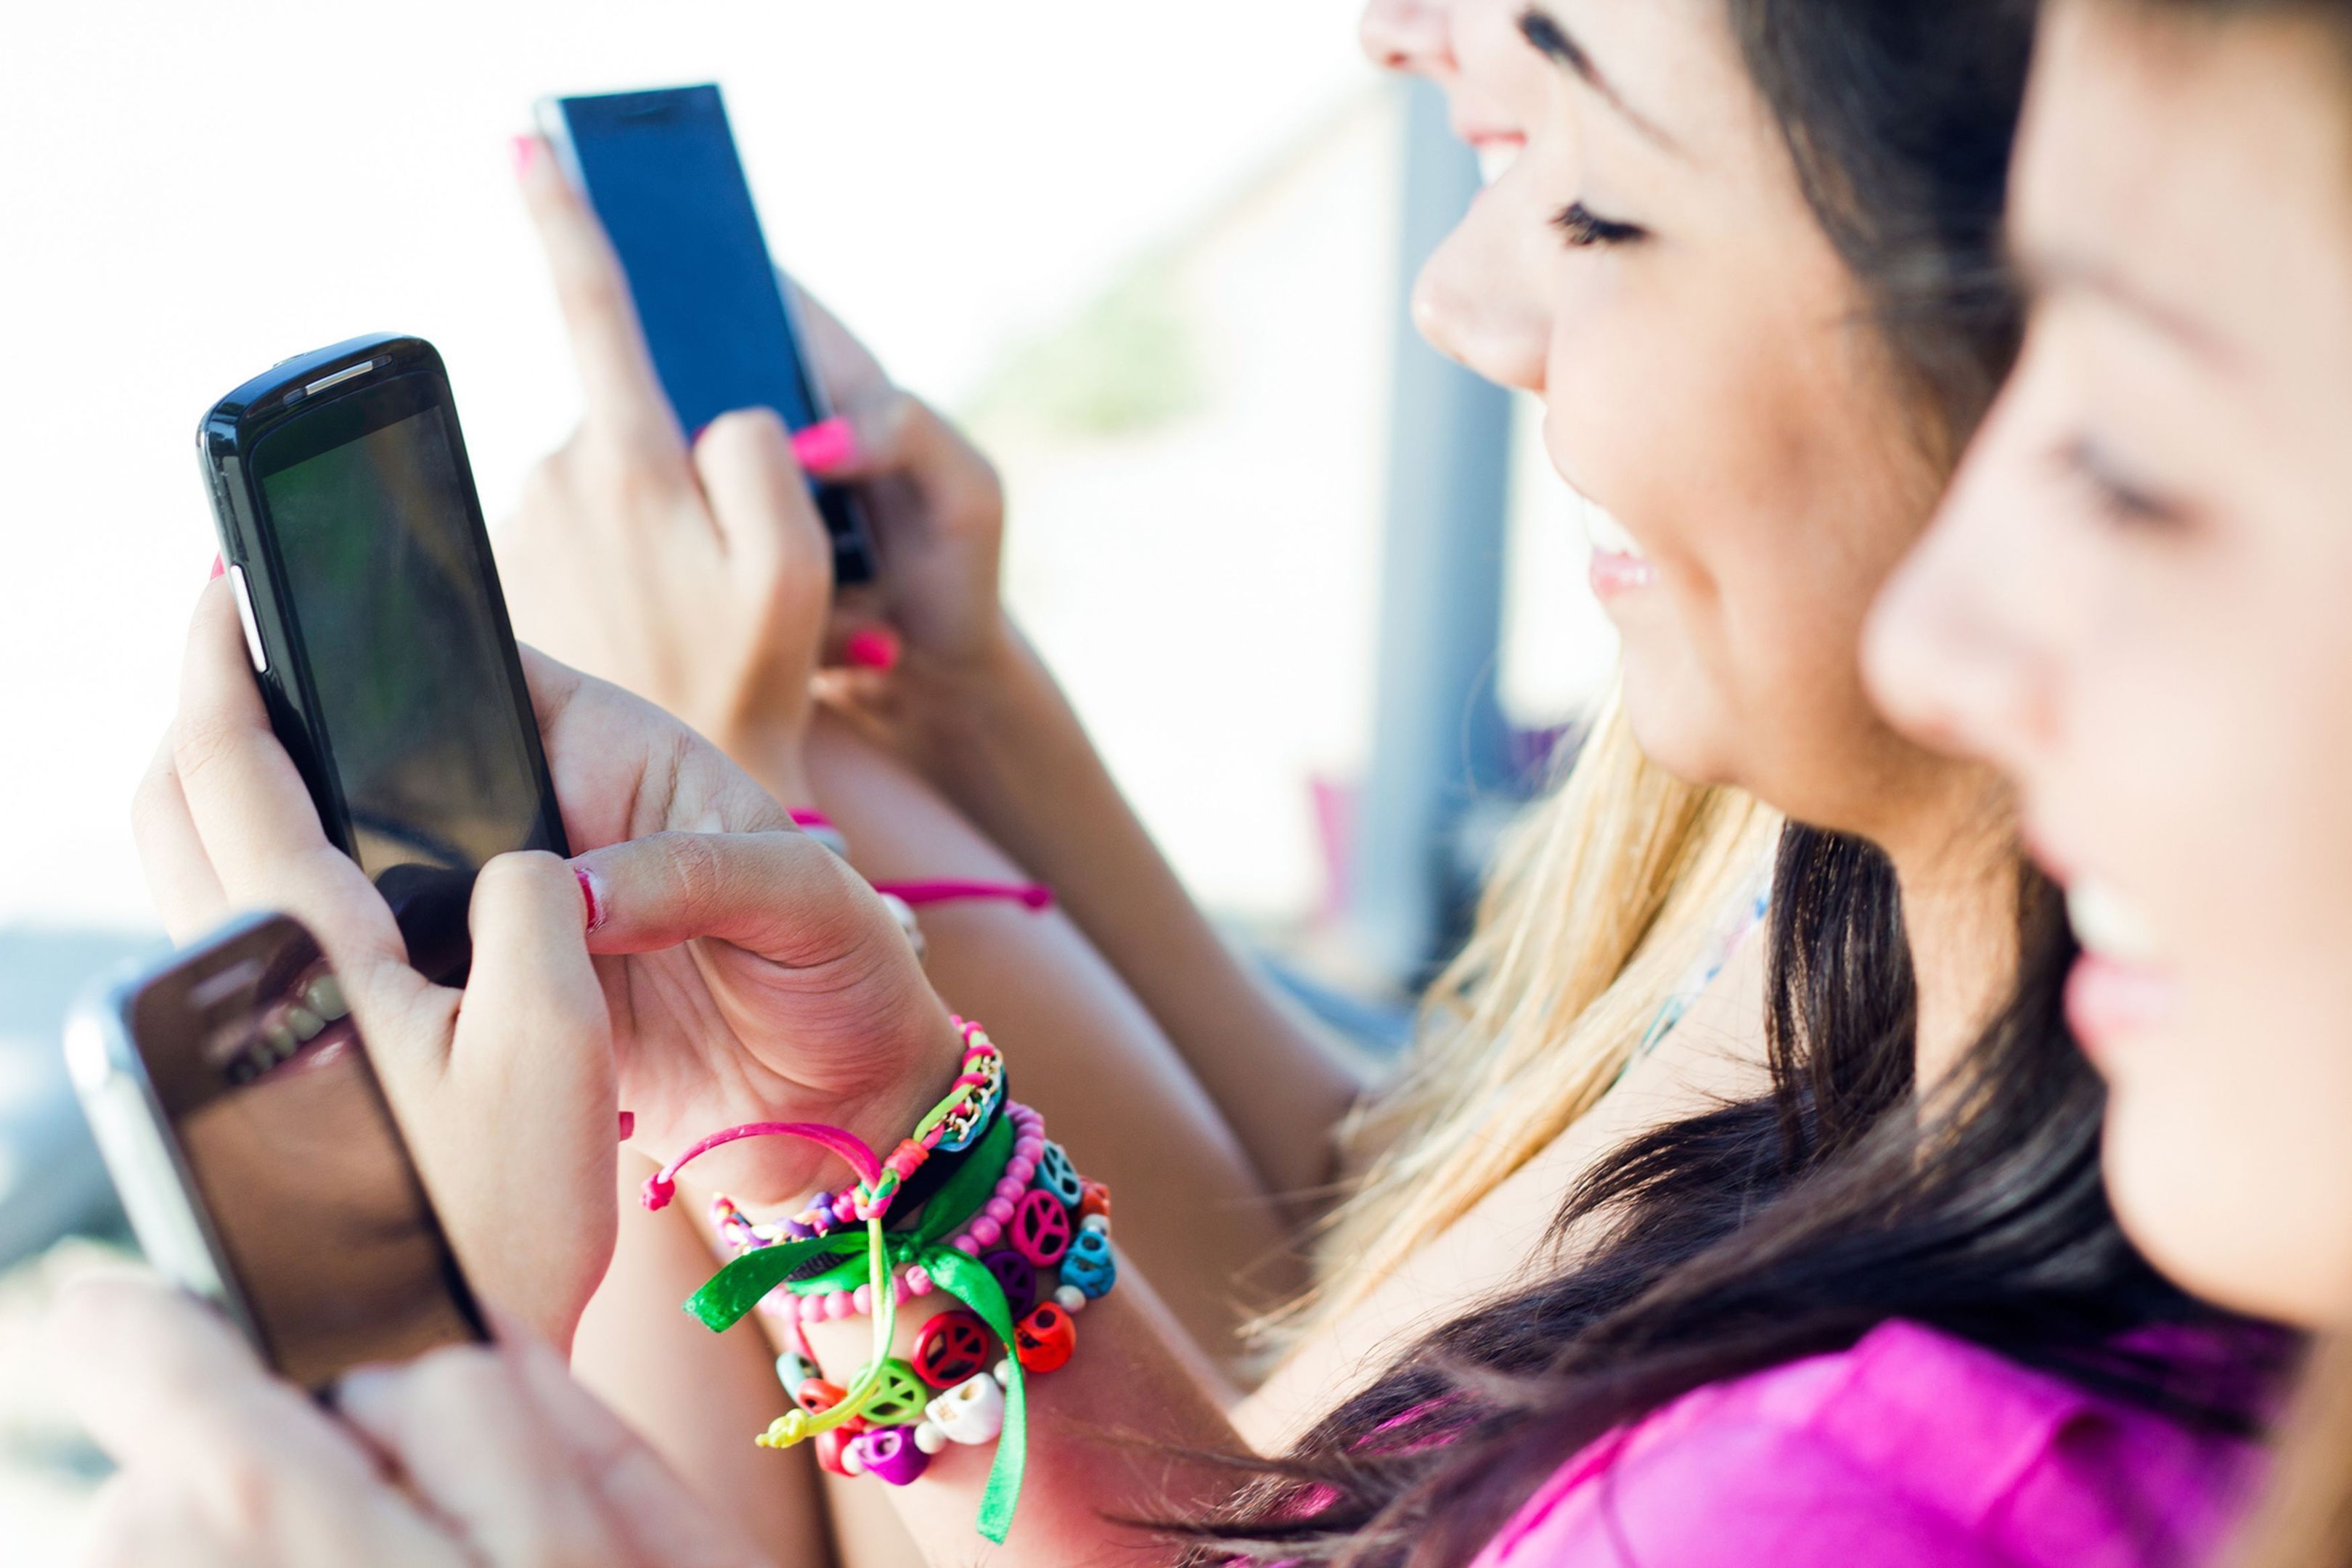 Girls with their smartphones in action. There's a time and a place, argues Craig Smith.